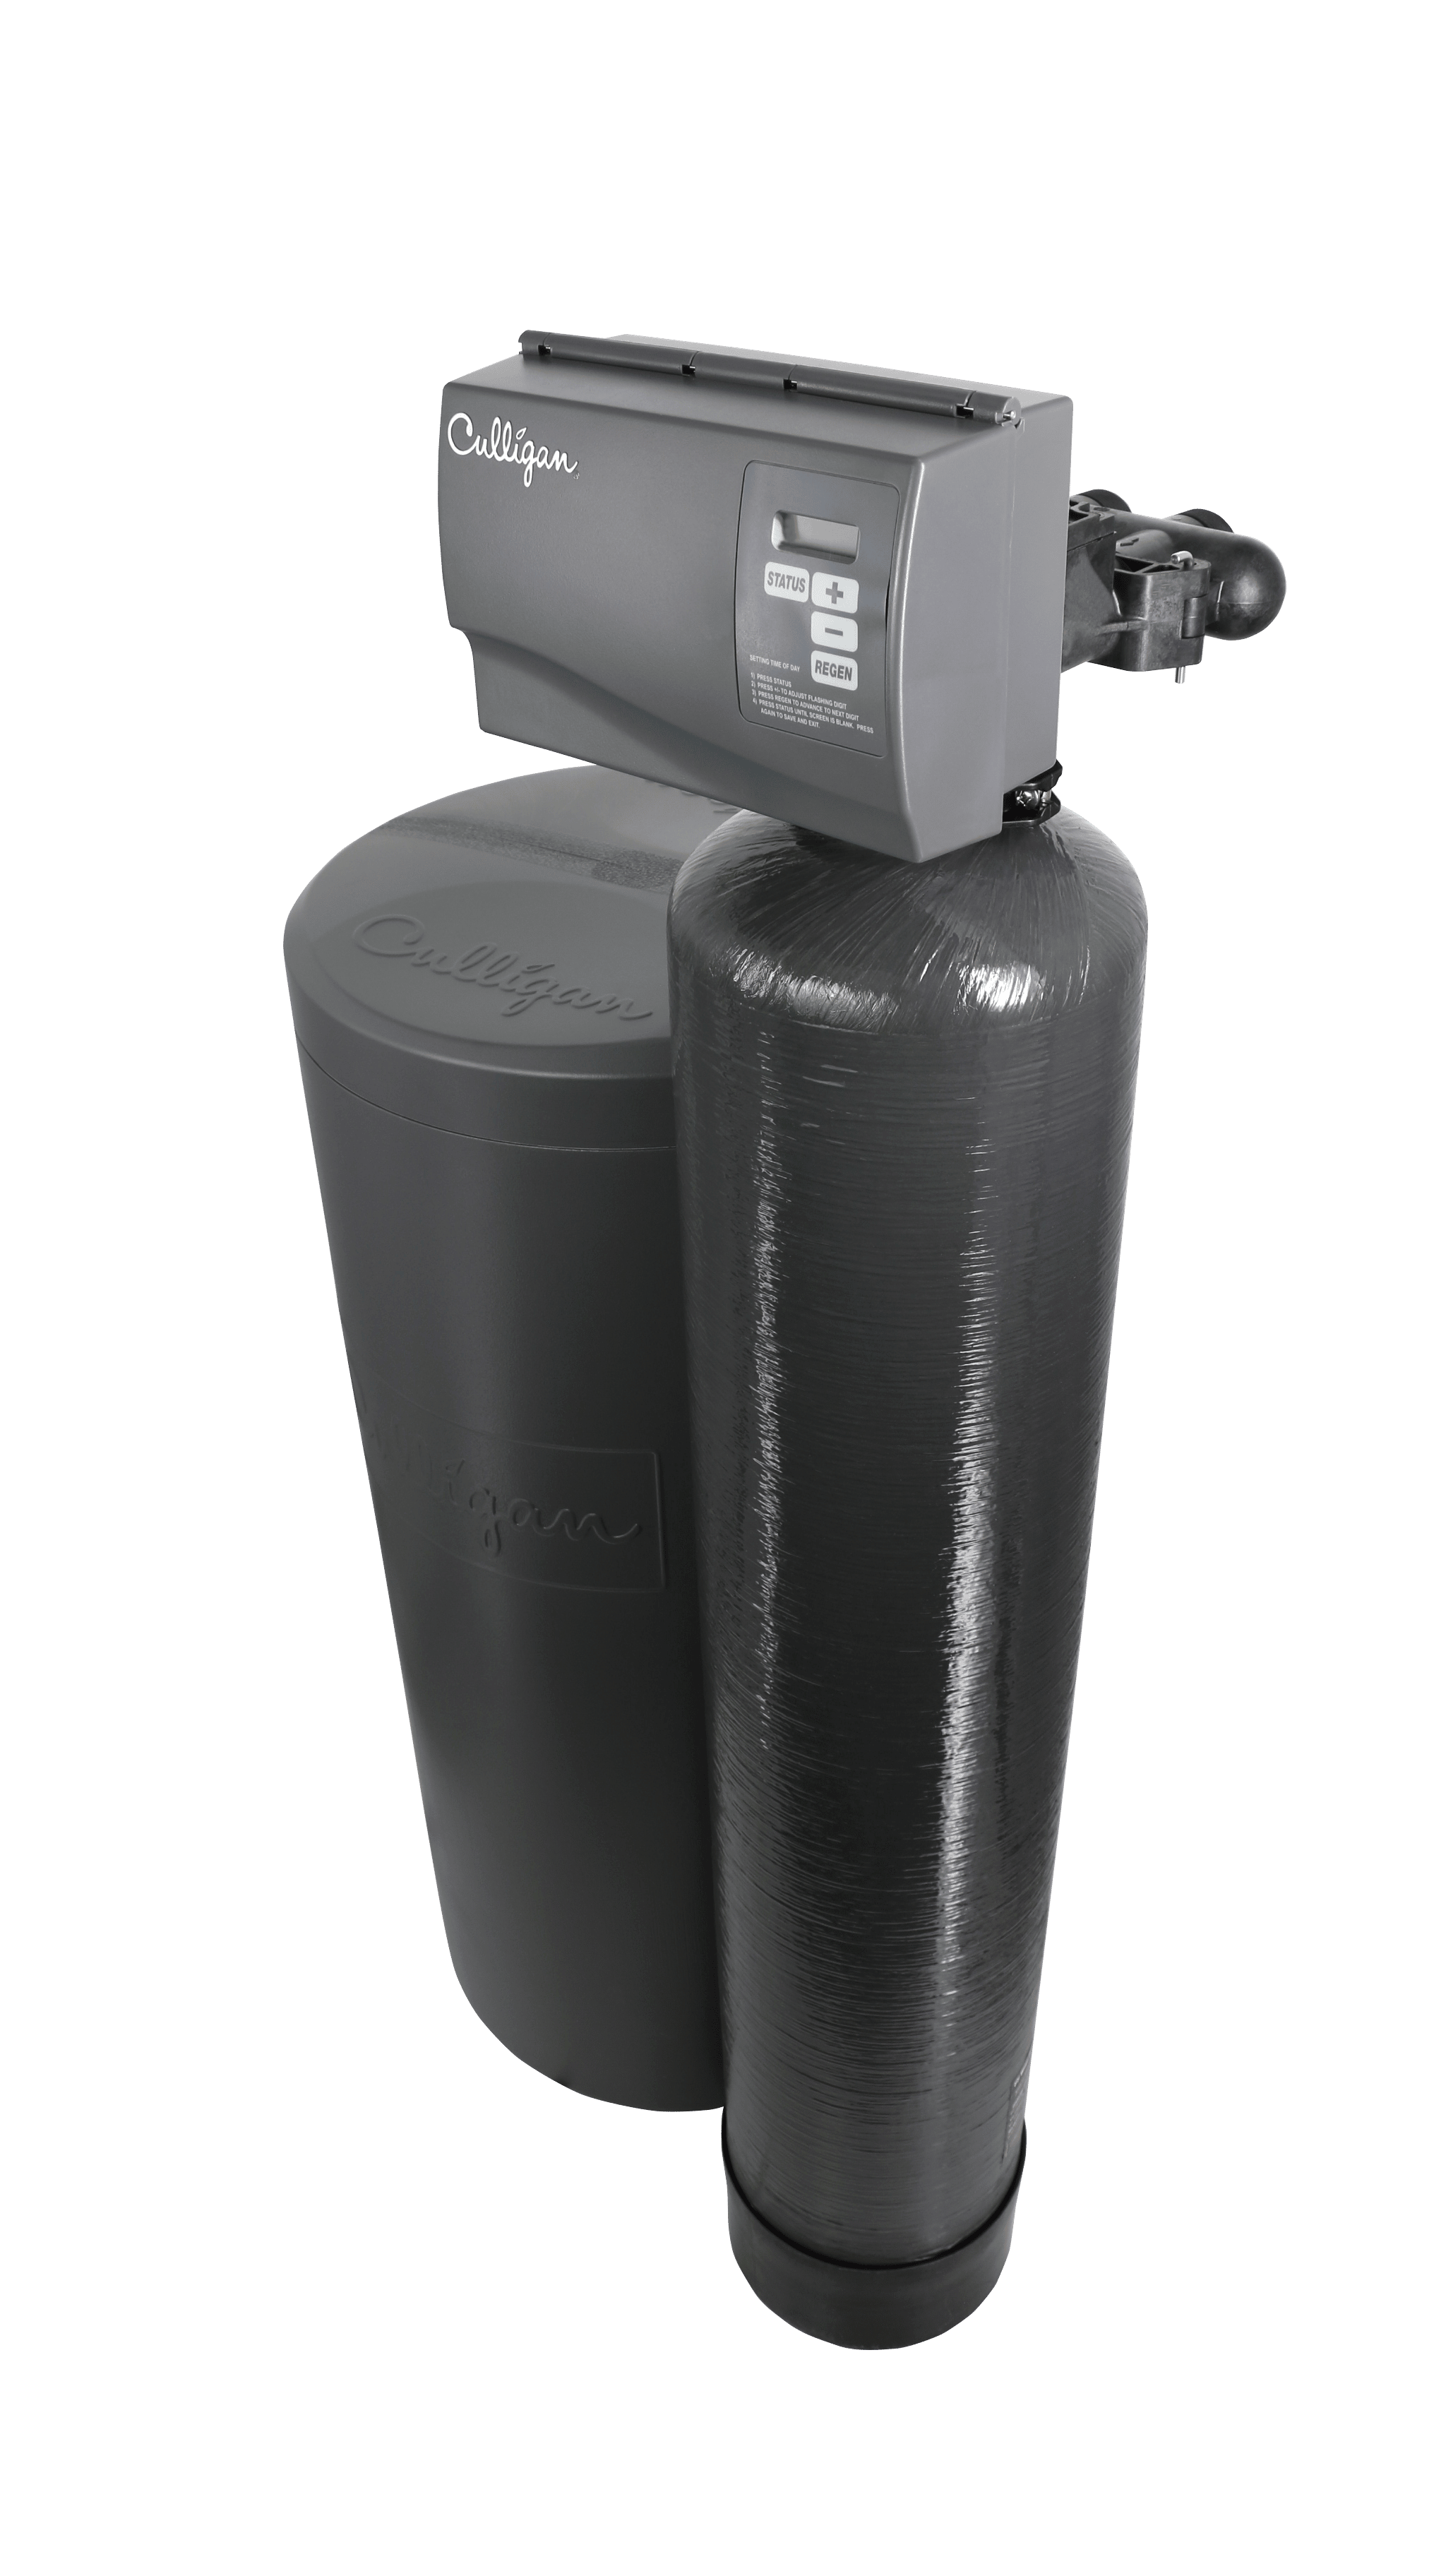 The Aquasential Select and Select Plus series High-efficiency Water Softener system by Culligan Water